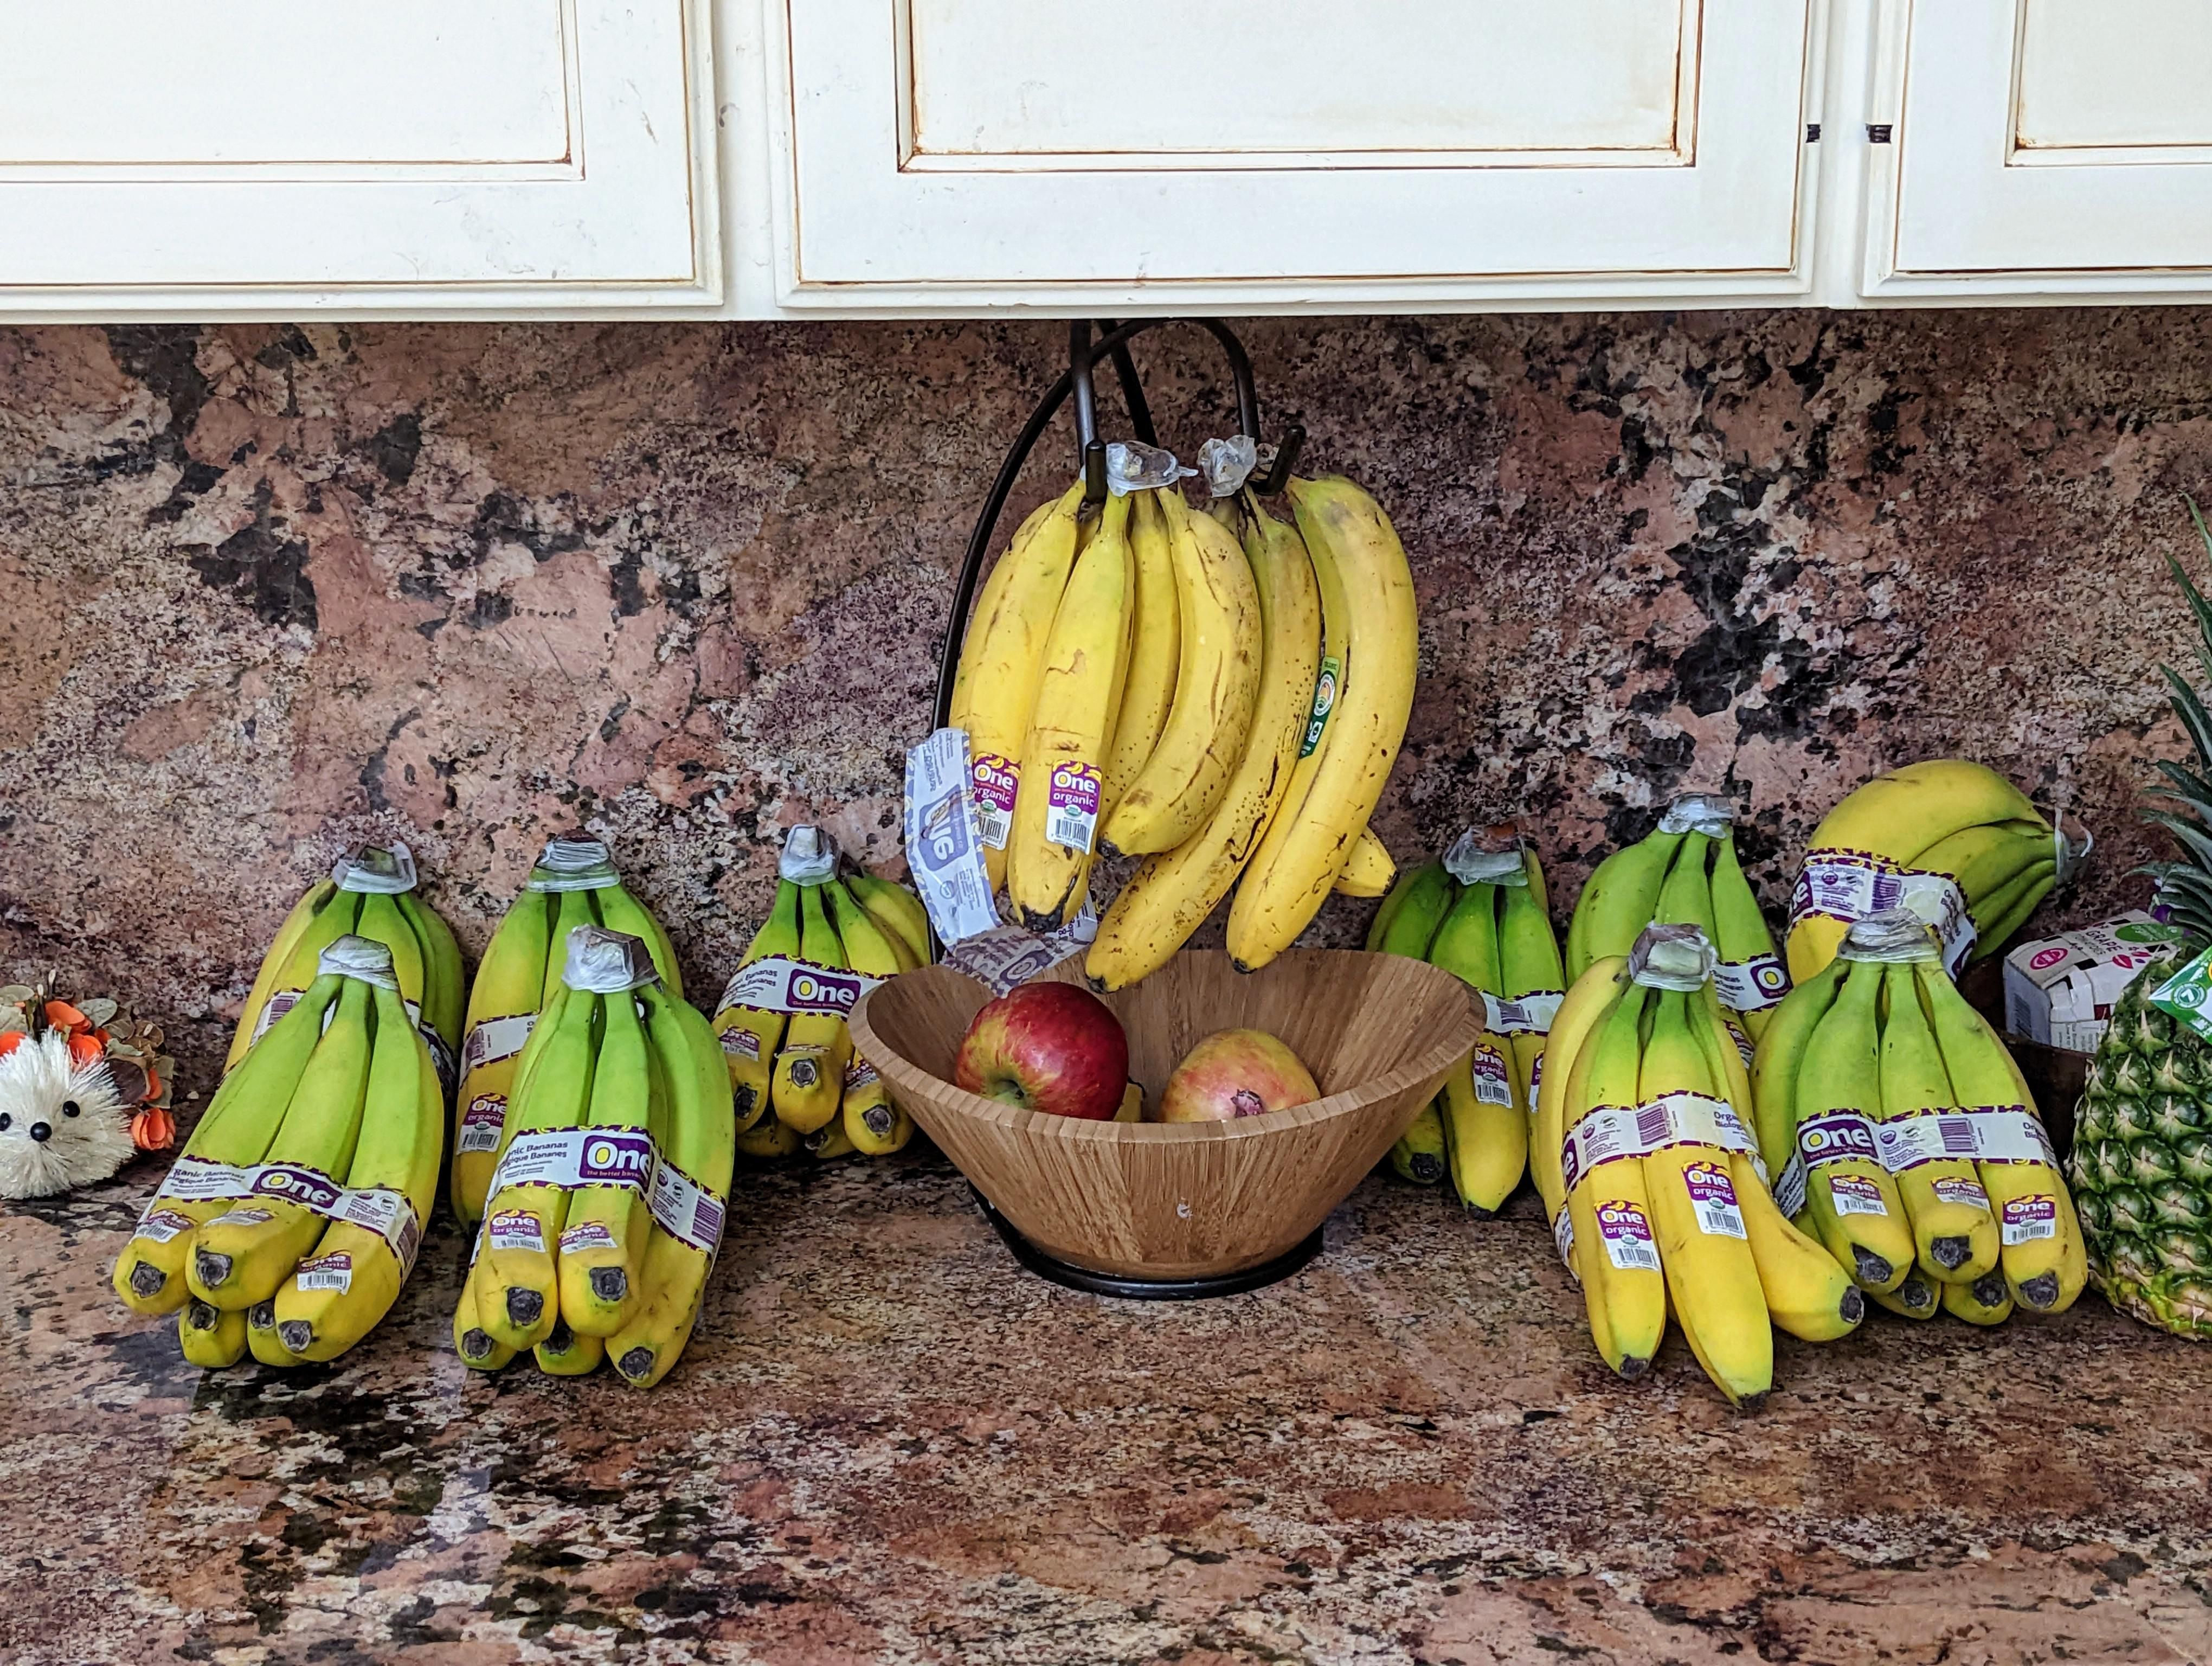 My wife thought she was ordering eight individual bananas...